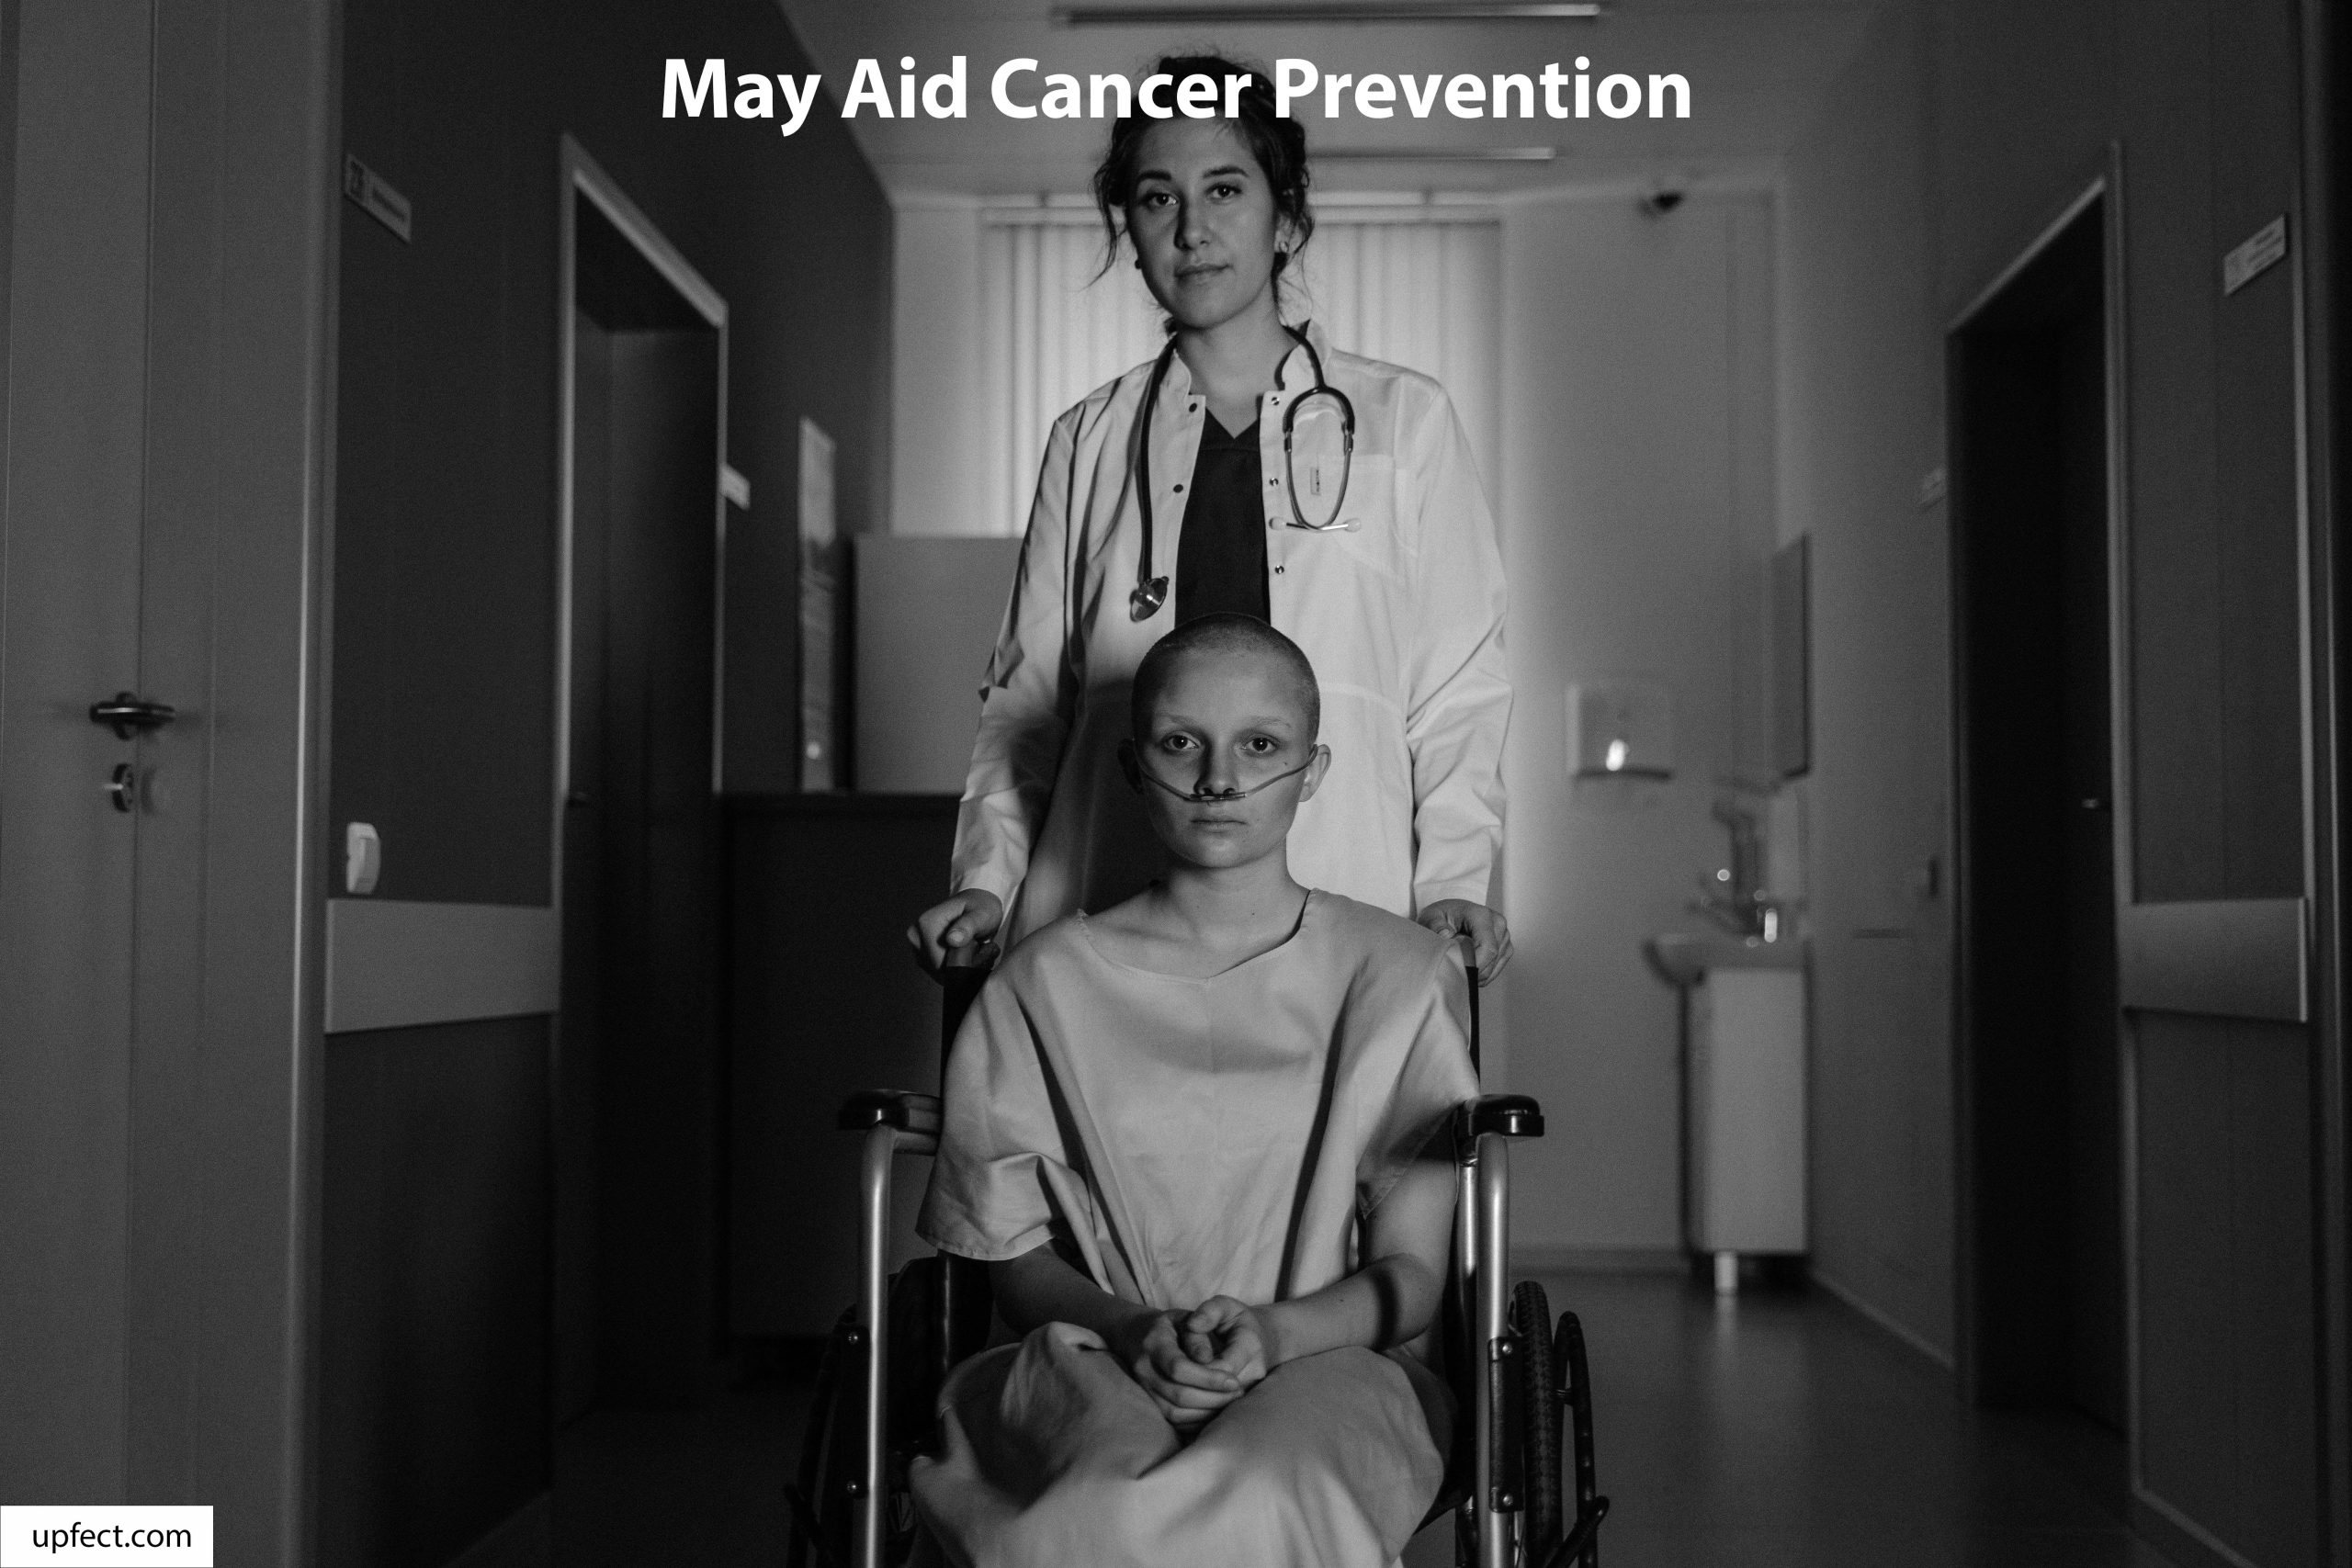 7. May Aid Cancer Prevention: